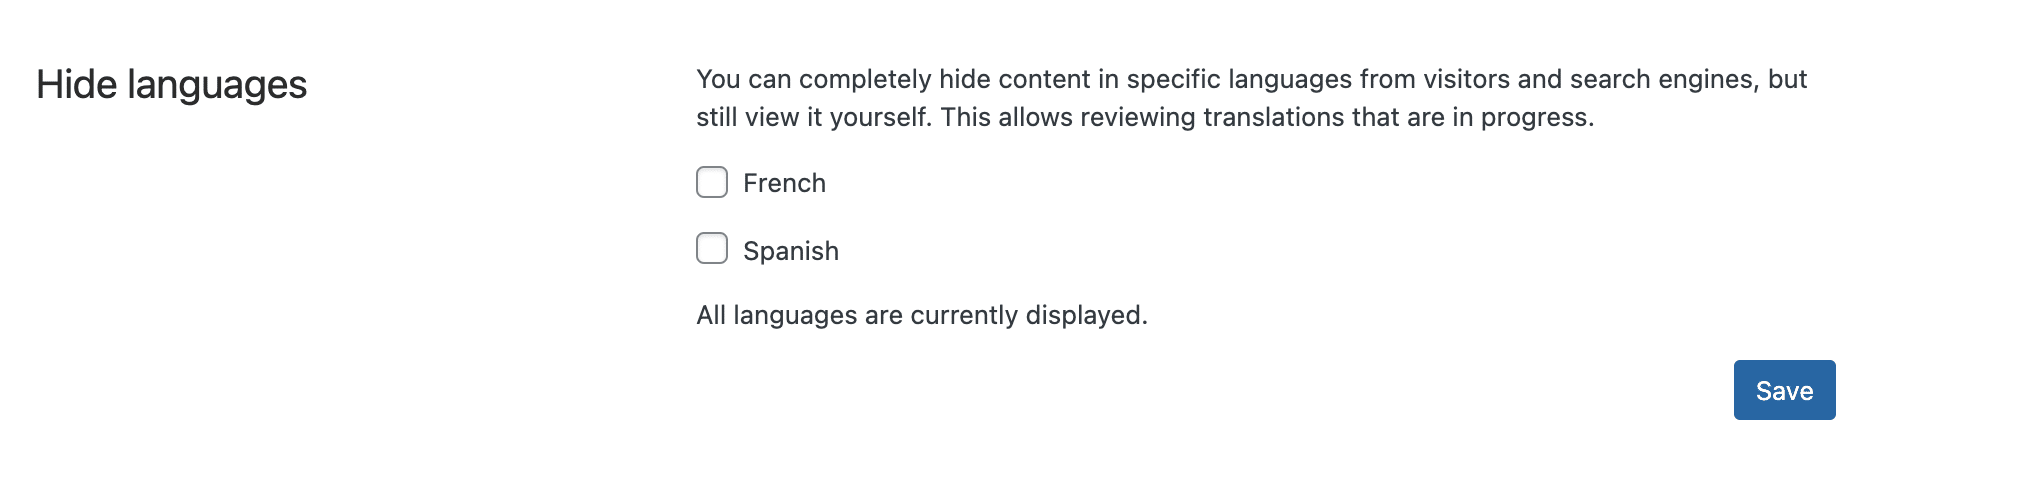 How to hide languages on WPML.